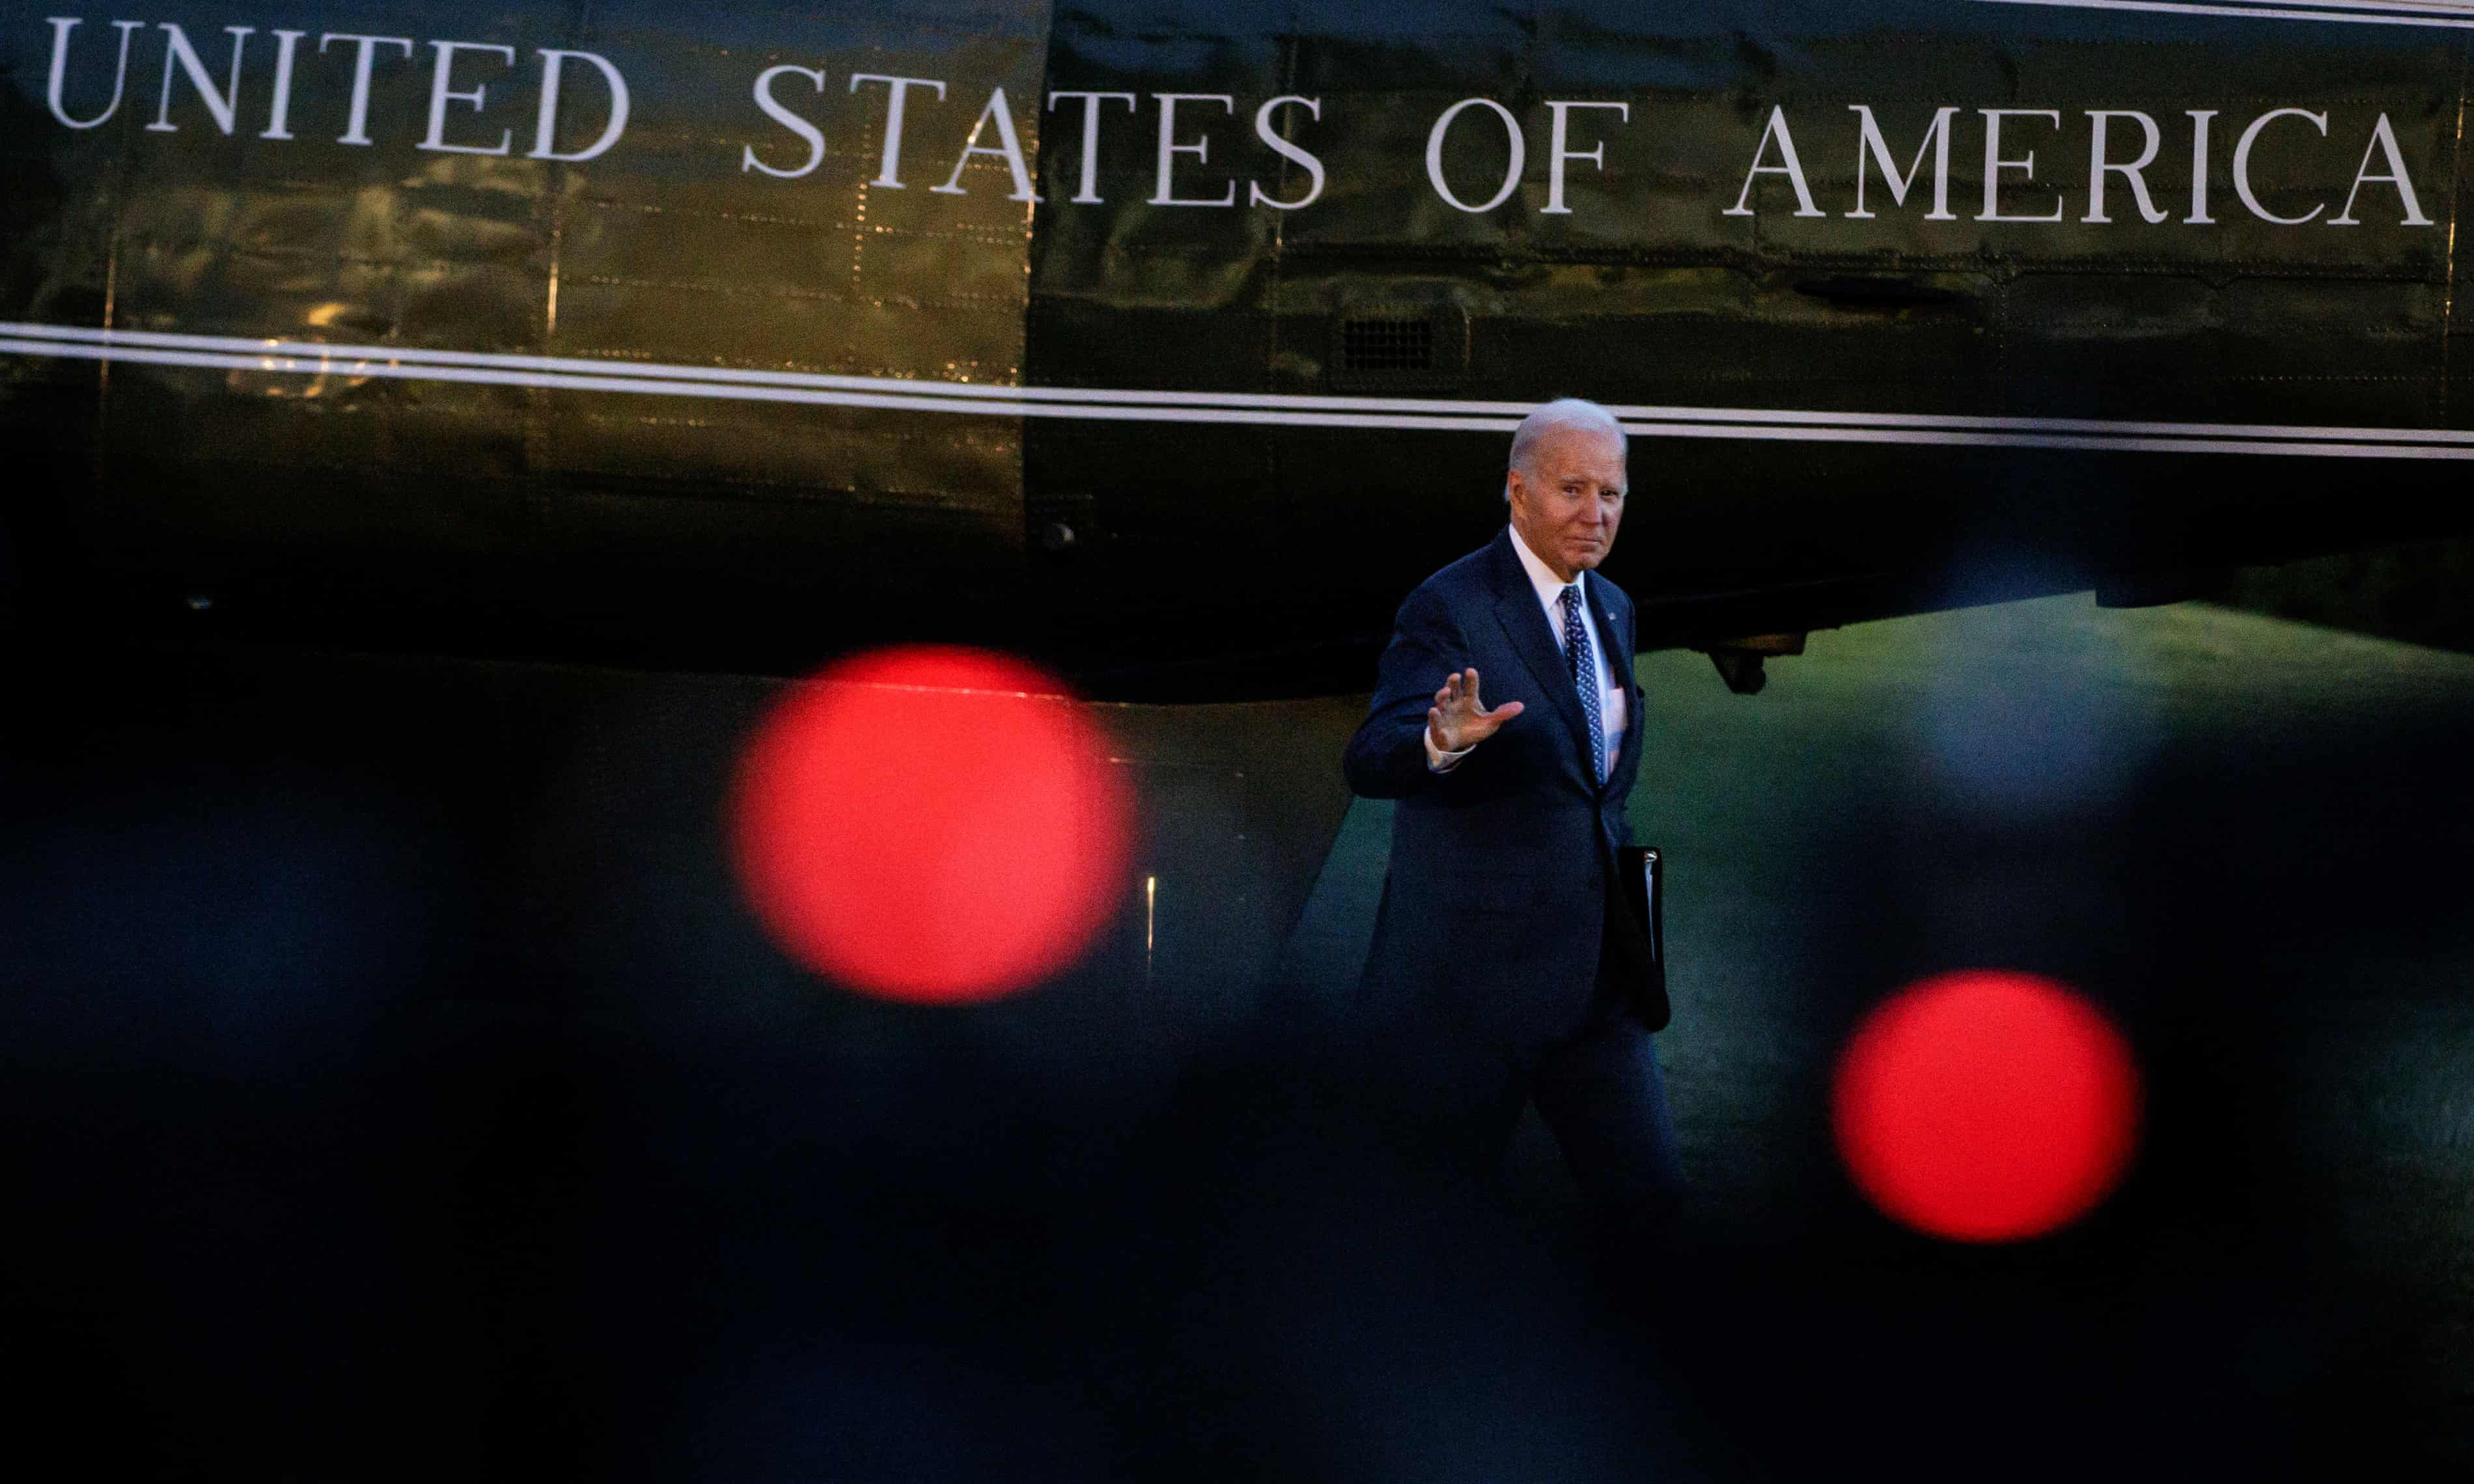 Special counsel: No charges for Biden in classified documents probe (washingtonpost.com)